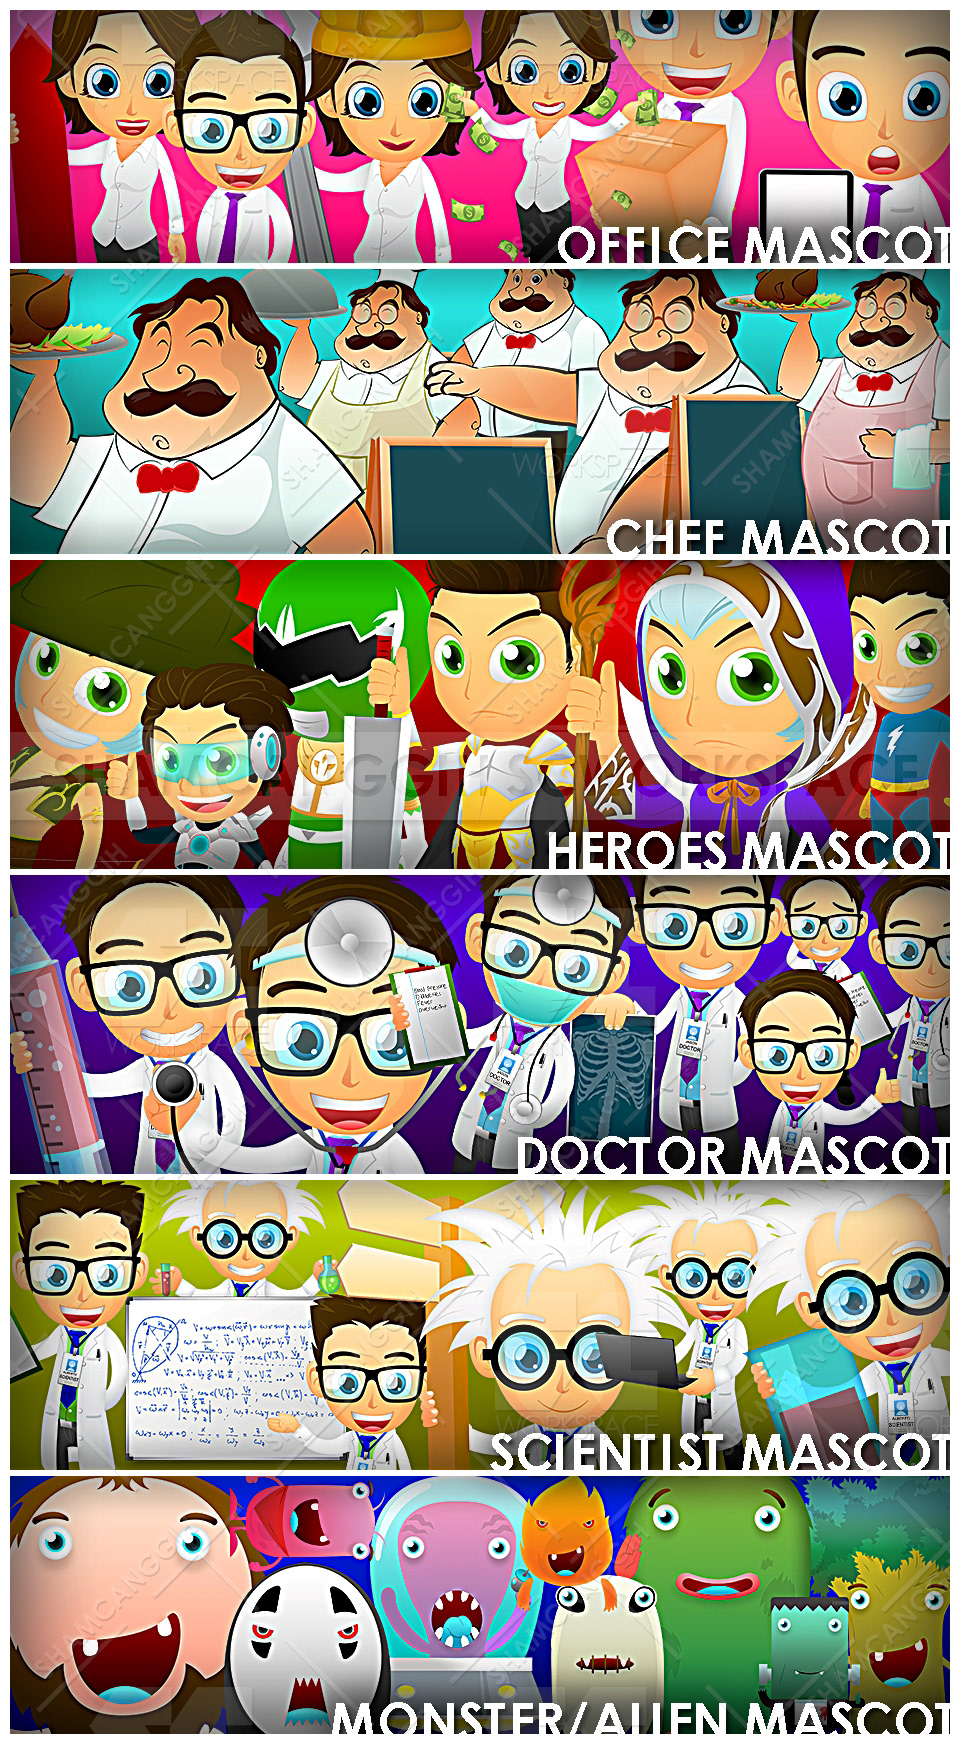 comic  character Mascot Office heroes doctor Scientist monster avatar cartoon